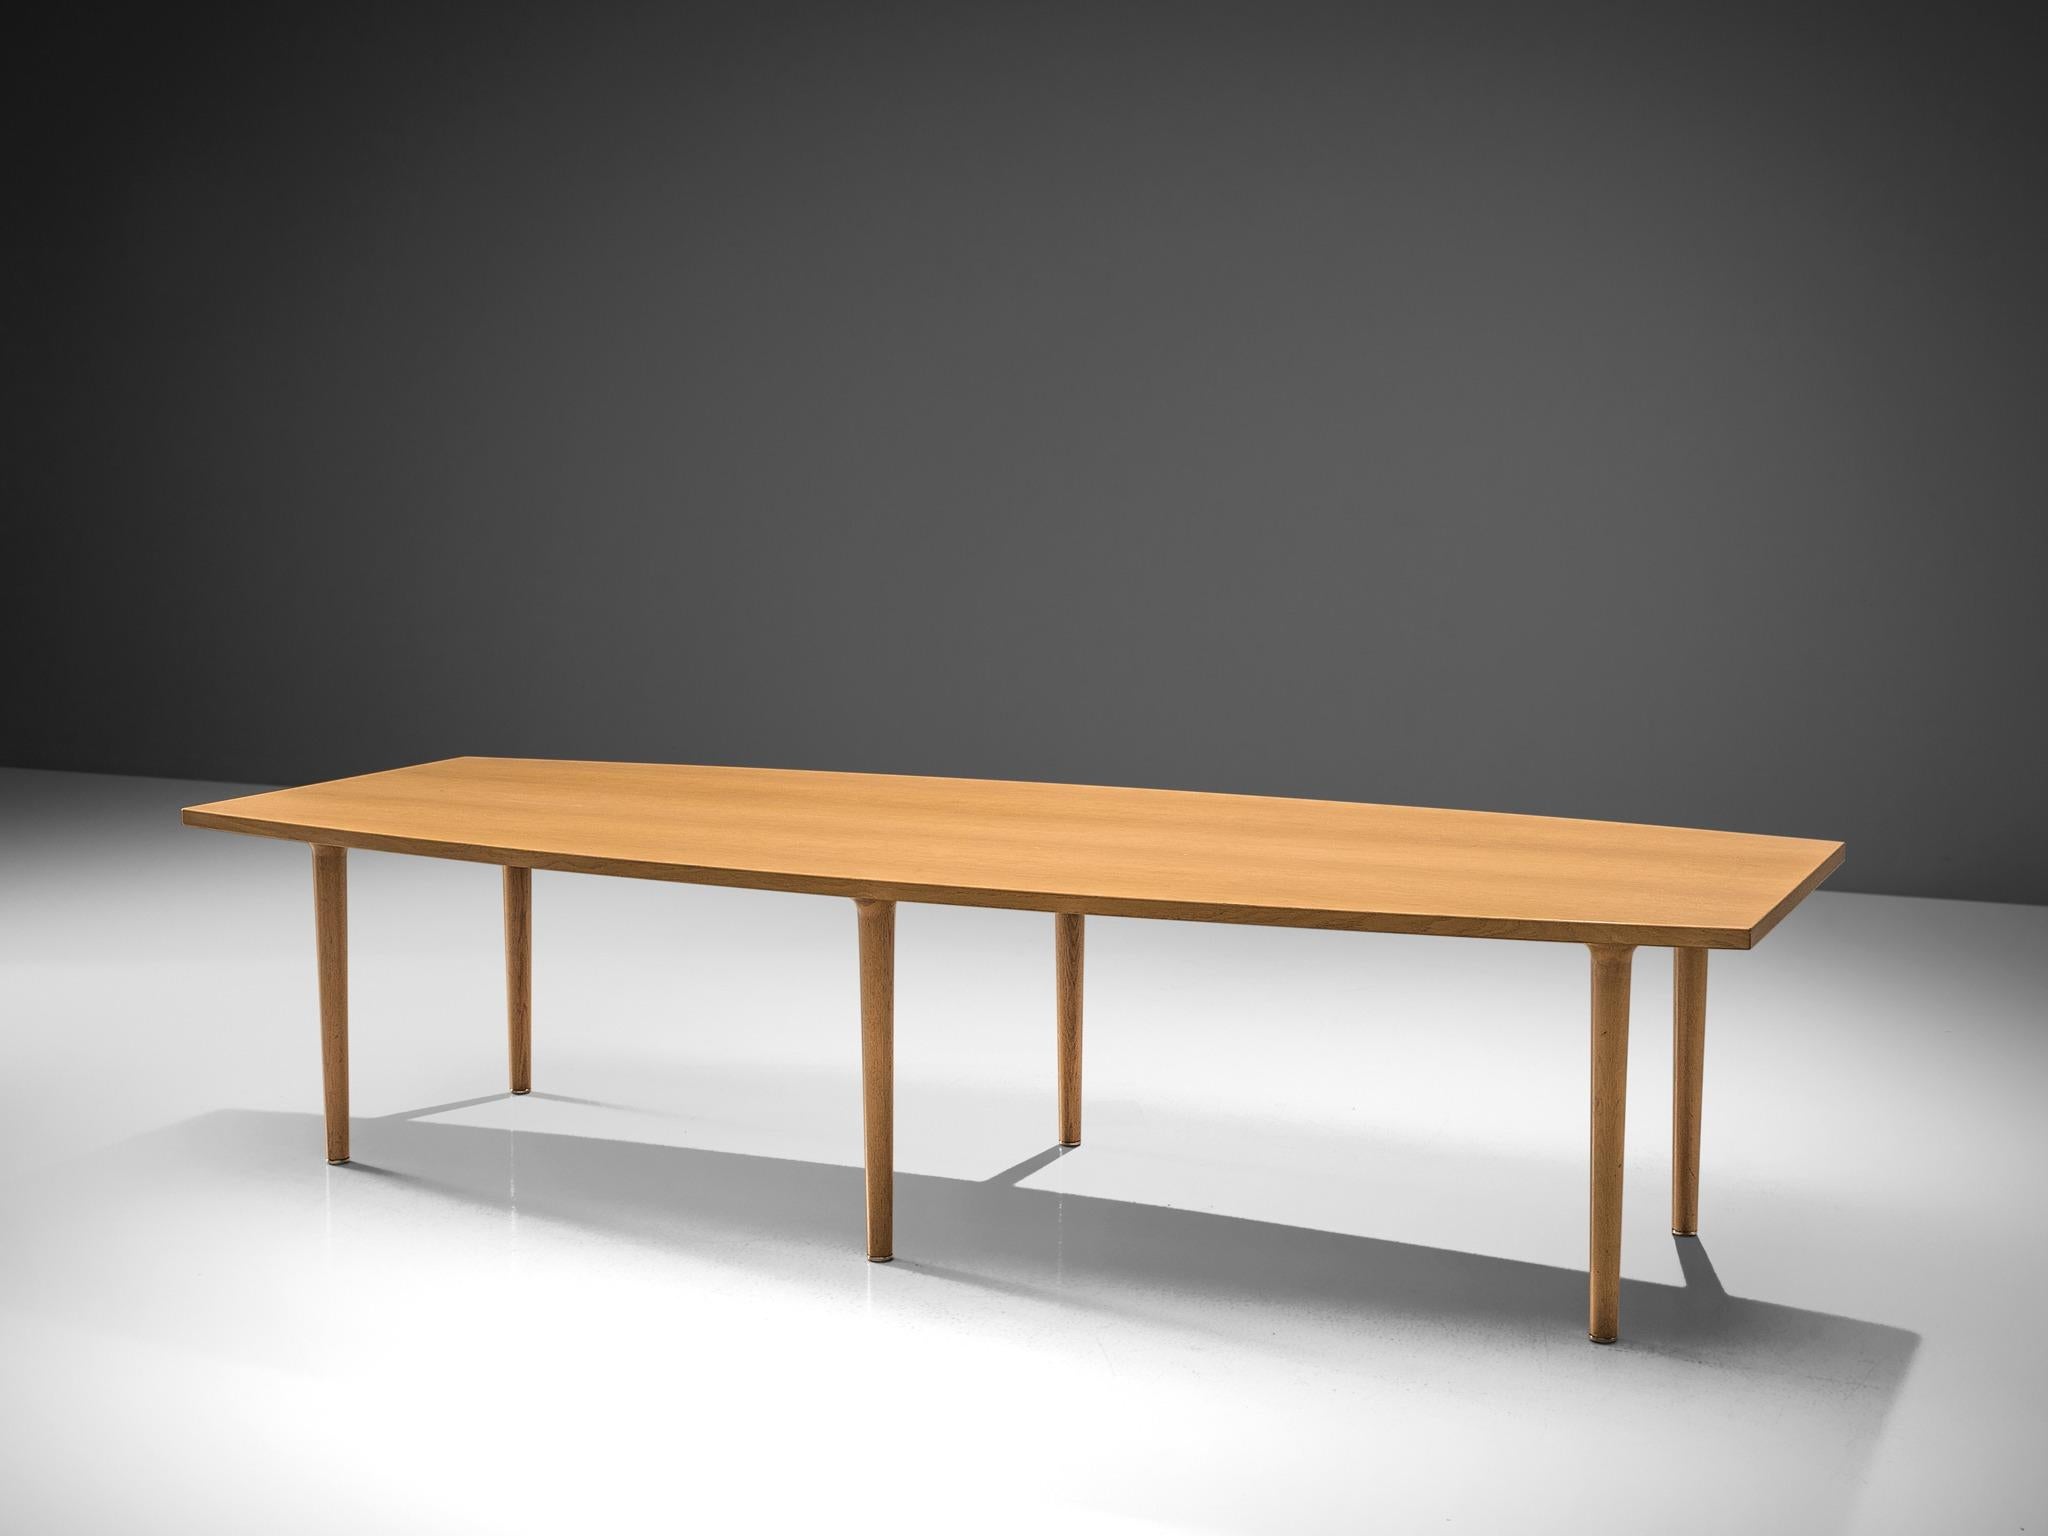 Hans J. Wegner for Johannes Hansen, boat shaped oak table, Denmark. 

This modest, simplistic conference table is designed by Hans J. Wegner and produced by Johannes Hansen. The table features six tapered legs and a large, light oak top. The